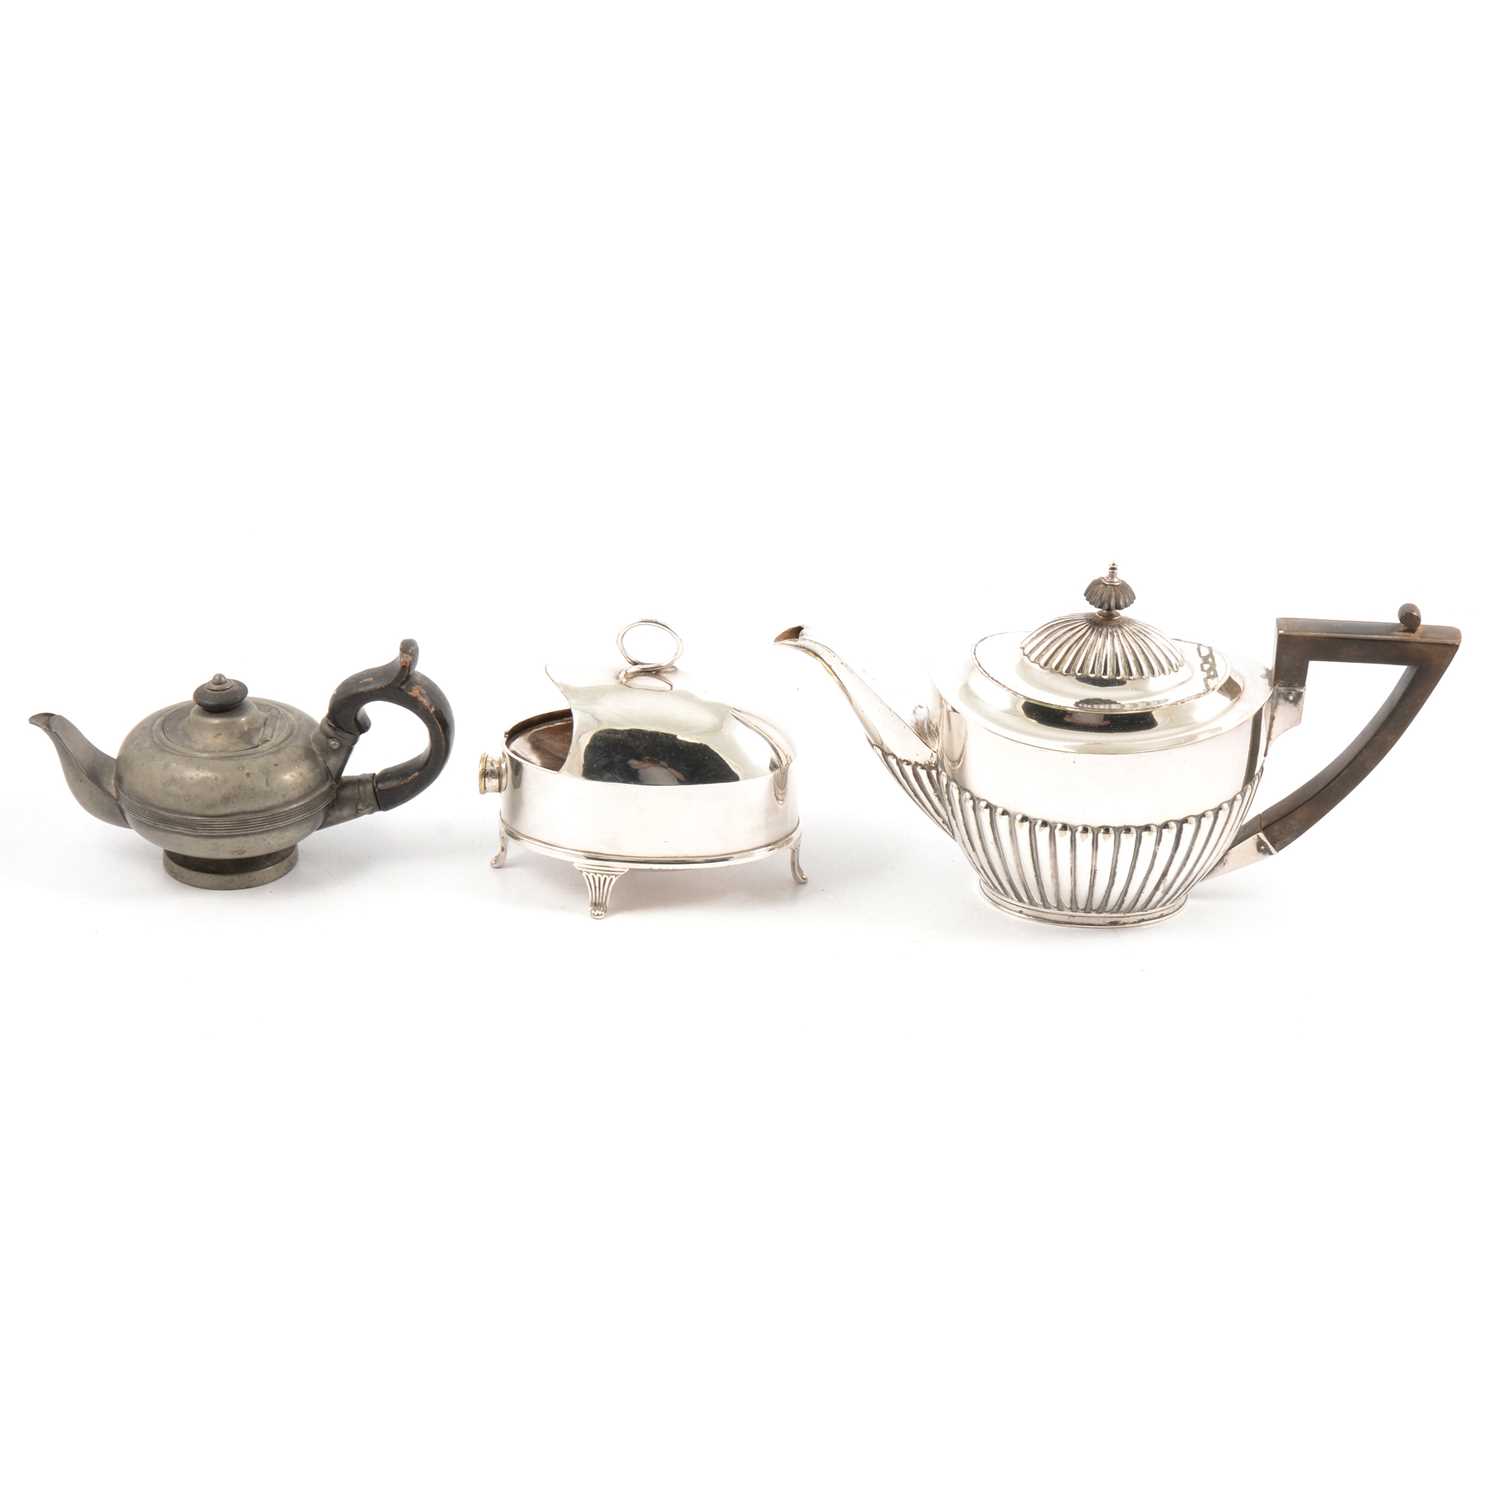 Silver-plated teapot, entree dishes, spoon warmer, cutlery and small pewter teapot.